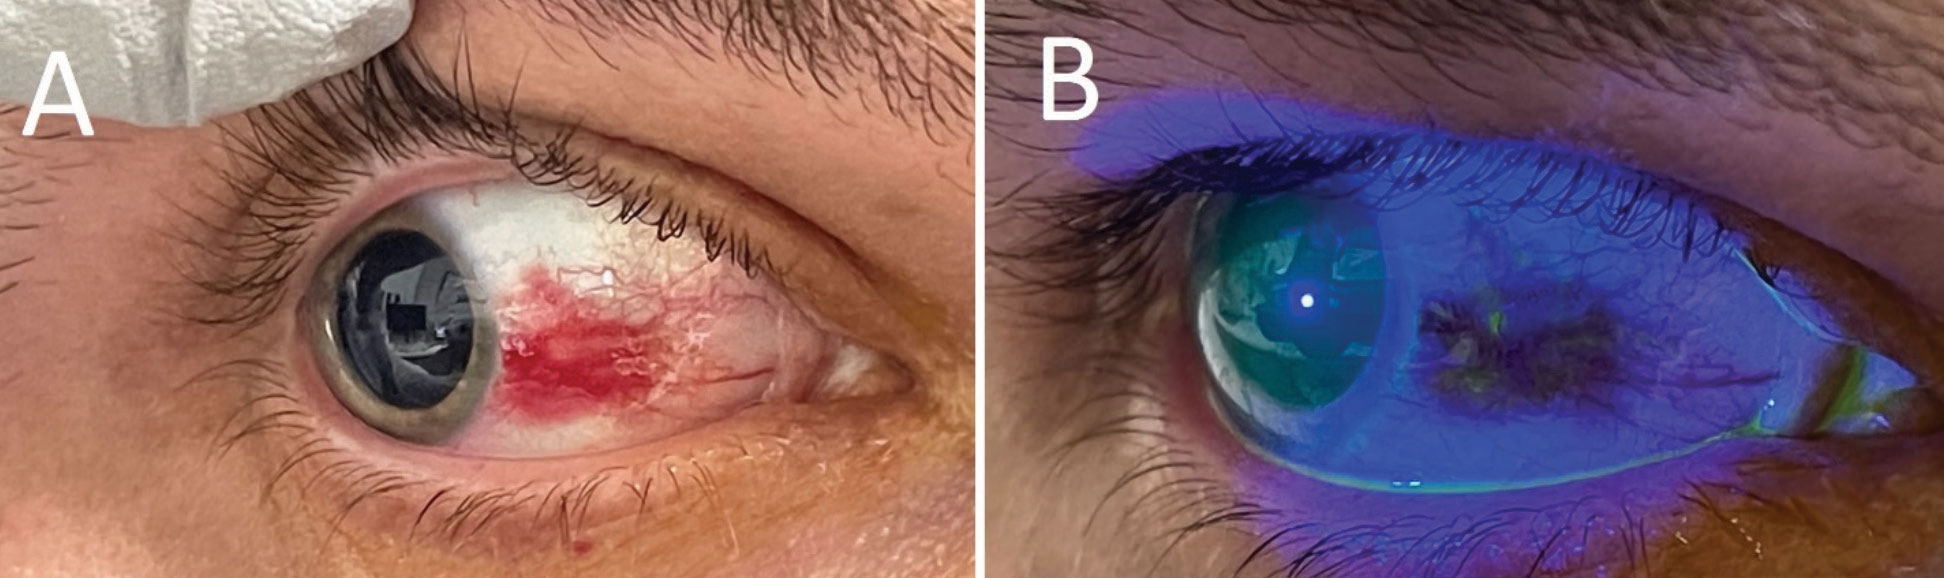 (A) Right eye under white light, revealing a focal subconjunctival hemorrhage in an otherwise quiet-appearing eye. (B) After sodium fluorescein application, there was a tiny conjunctival defect appreciable in the area of hemorrhage.